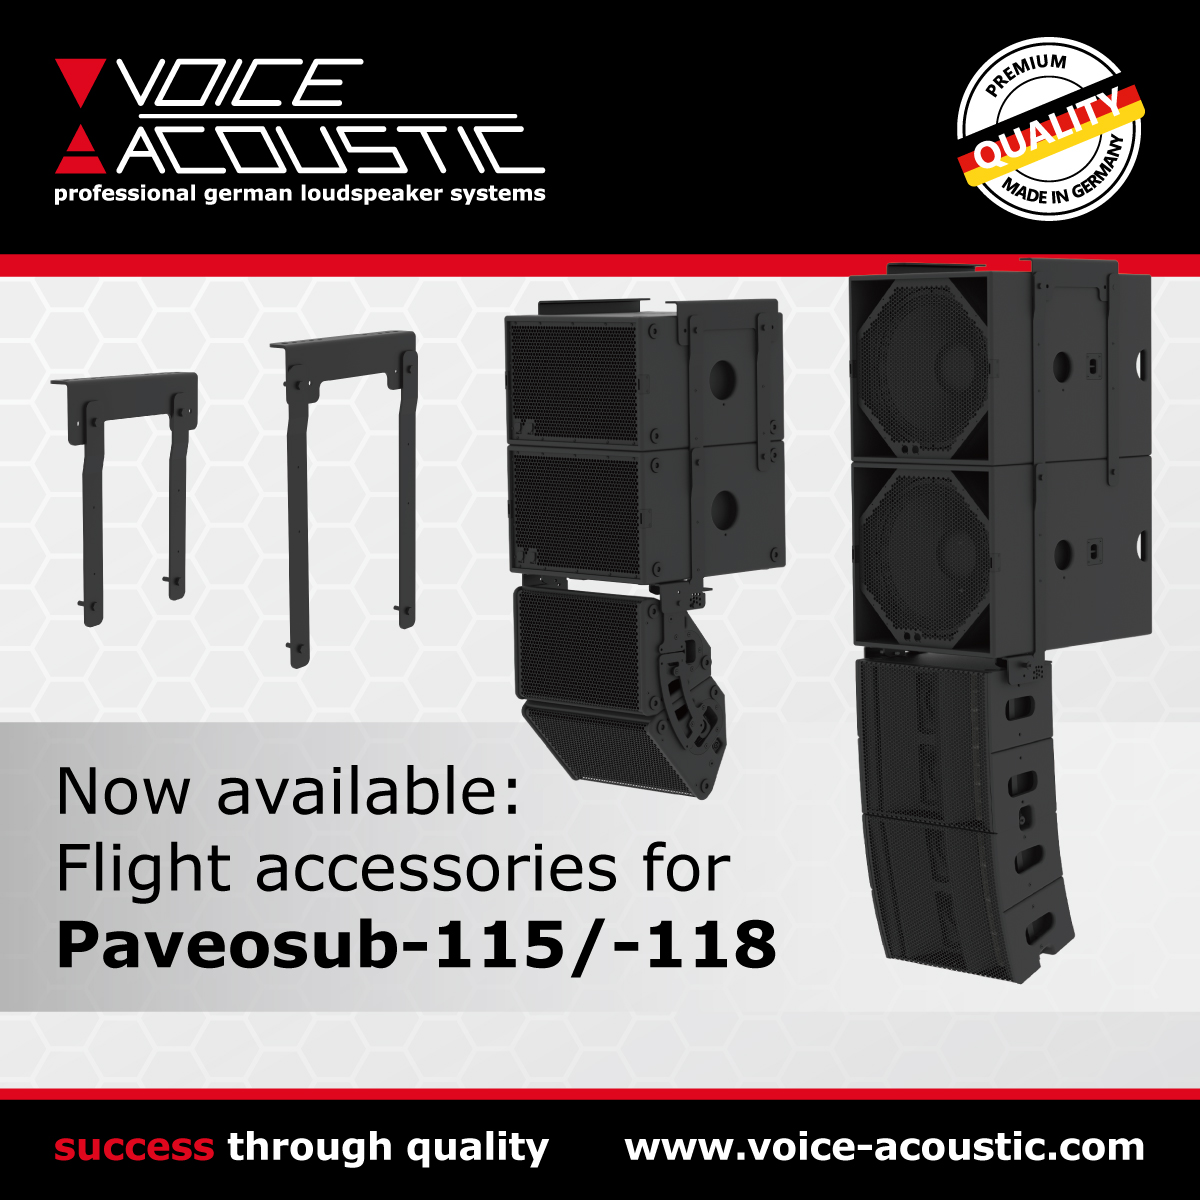 Flight accessories for Paveosub-115/118 available